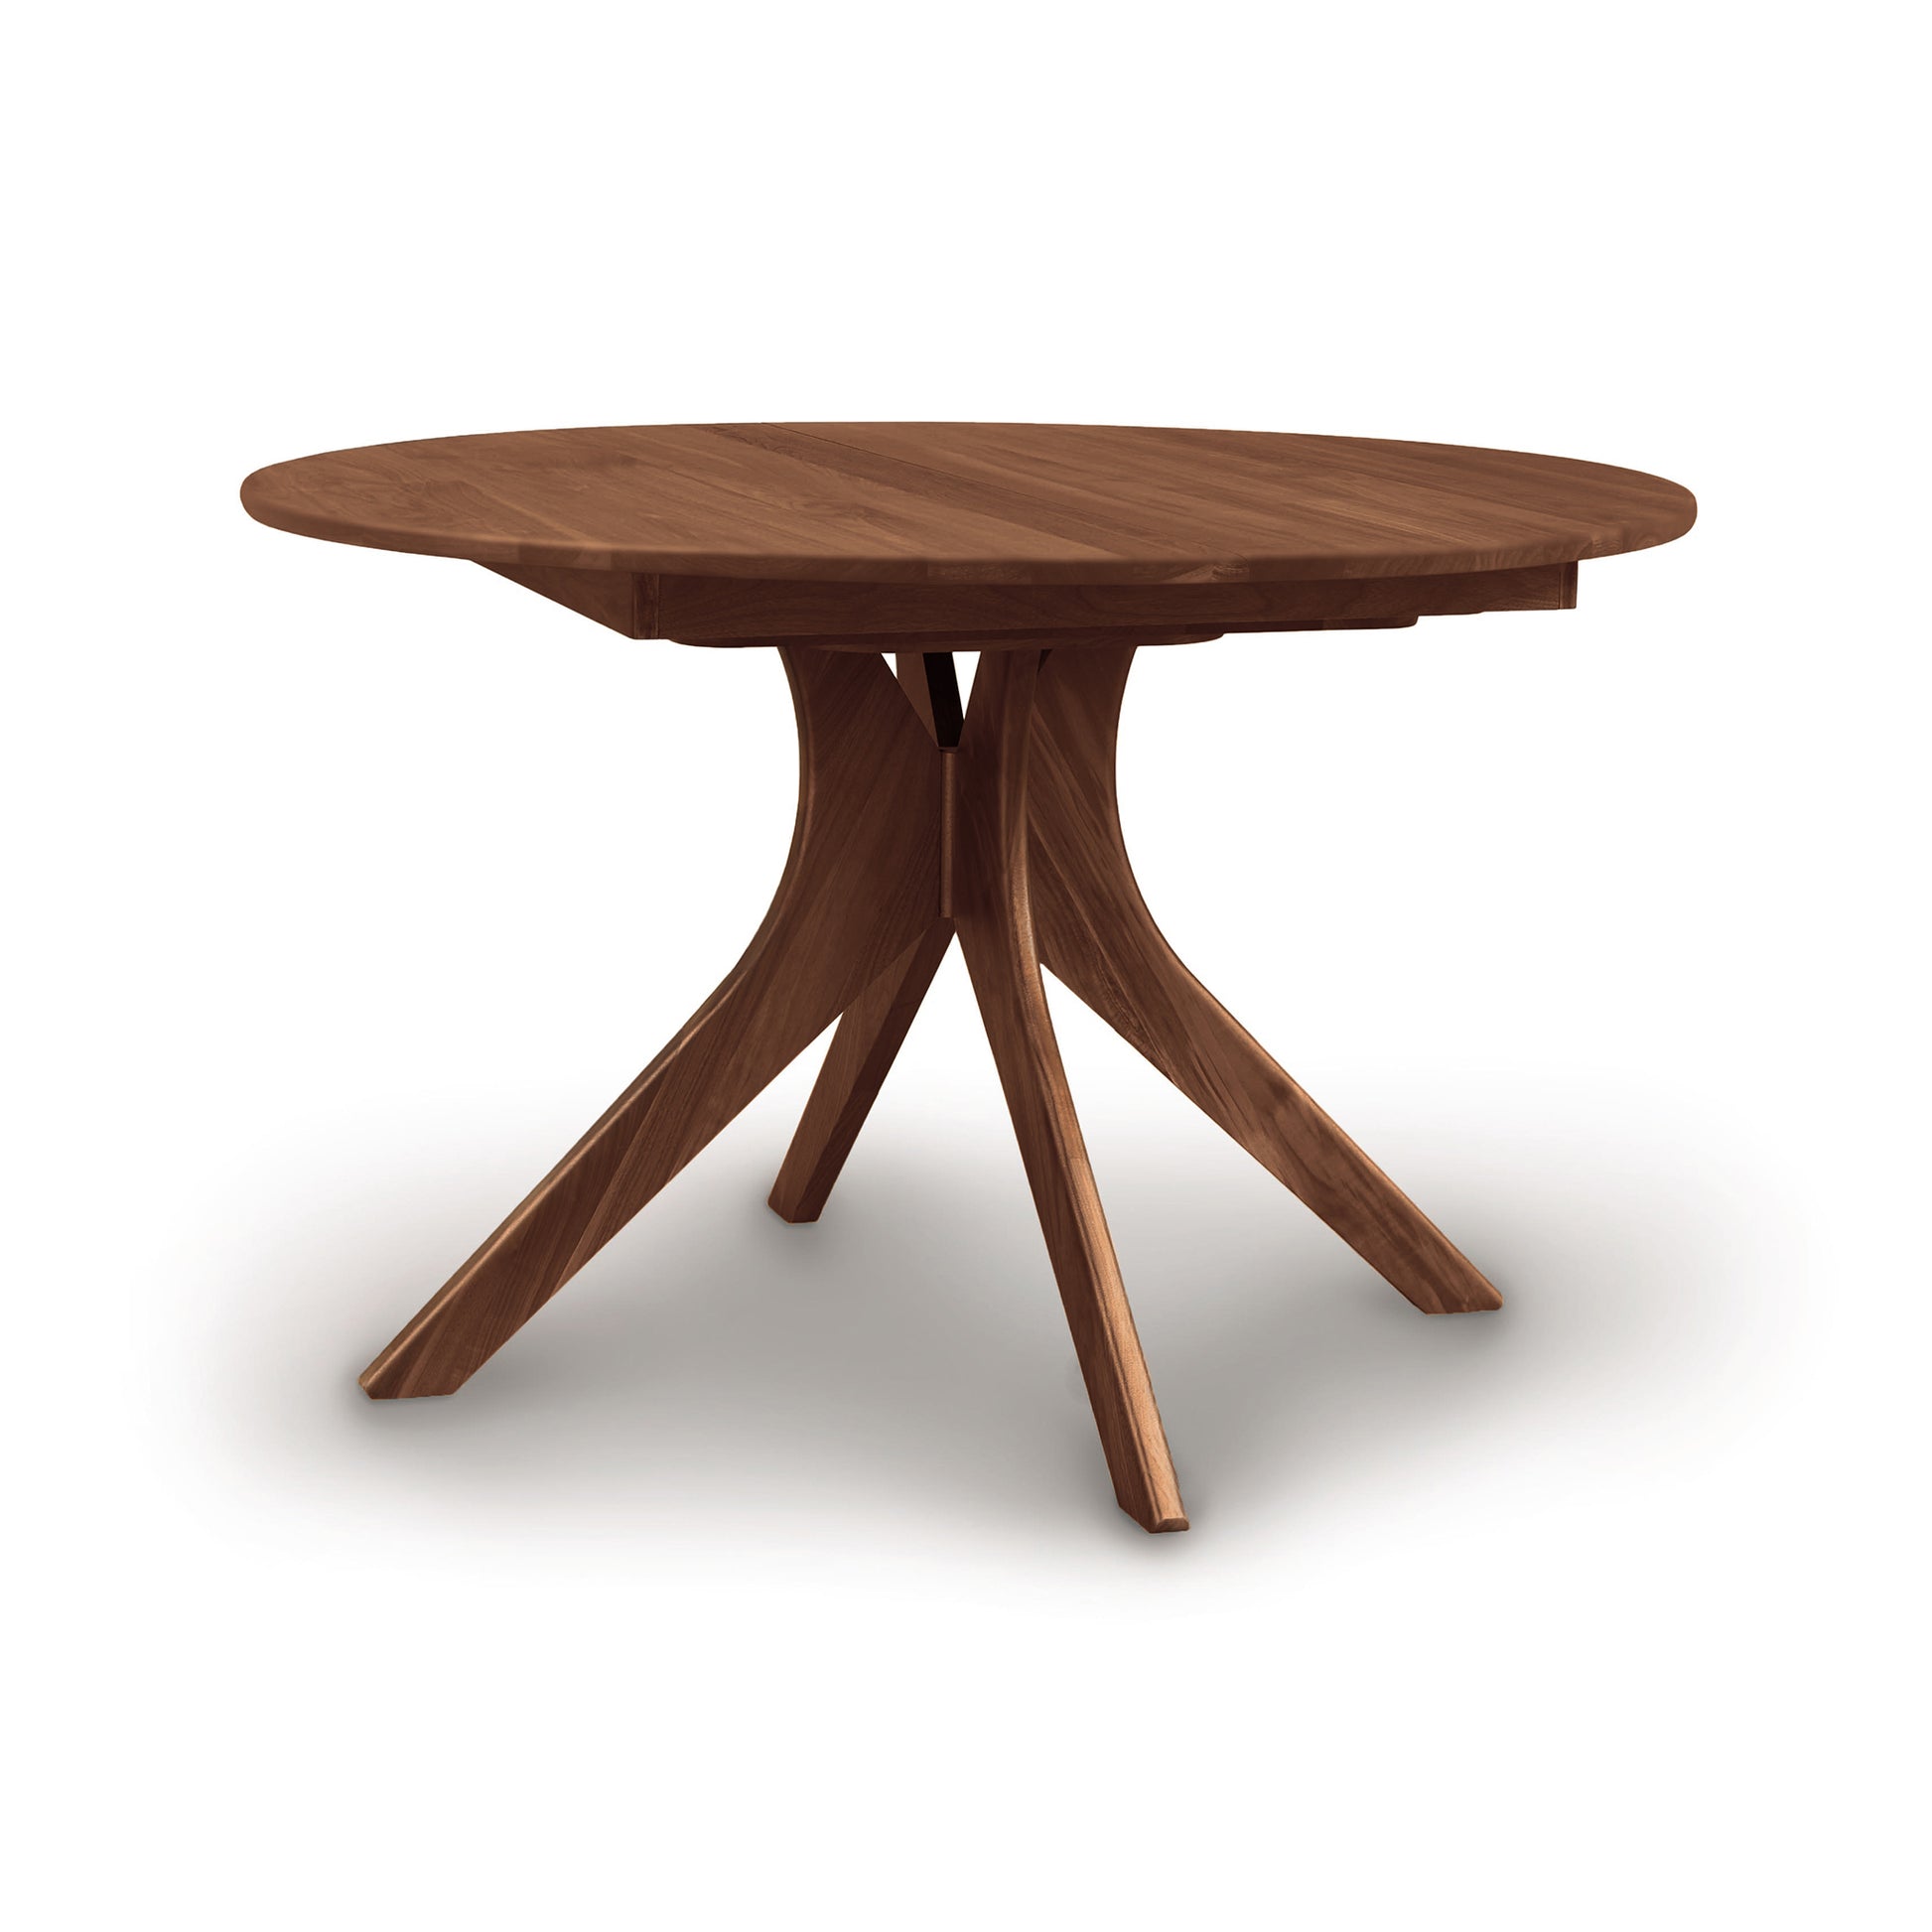 An Copeland Furniture Audrey Round Extension Dining Table, crafted from solid wood with a butterfly leaf mechanism, isolated on a white background.